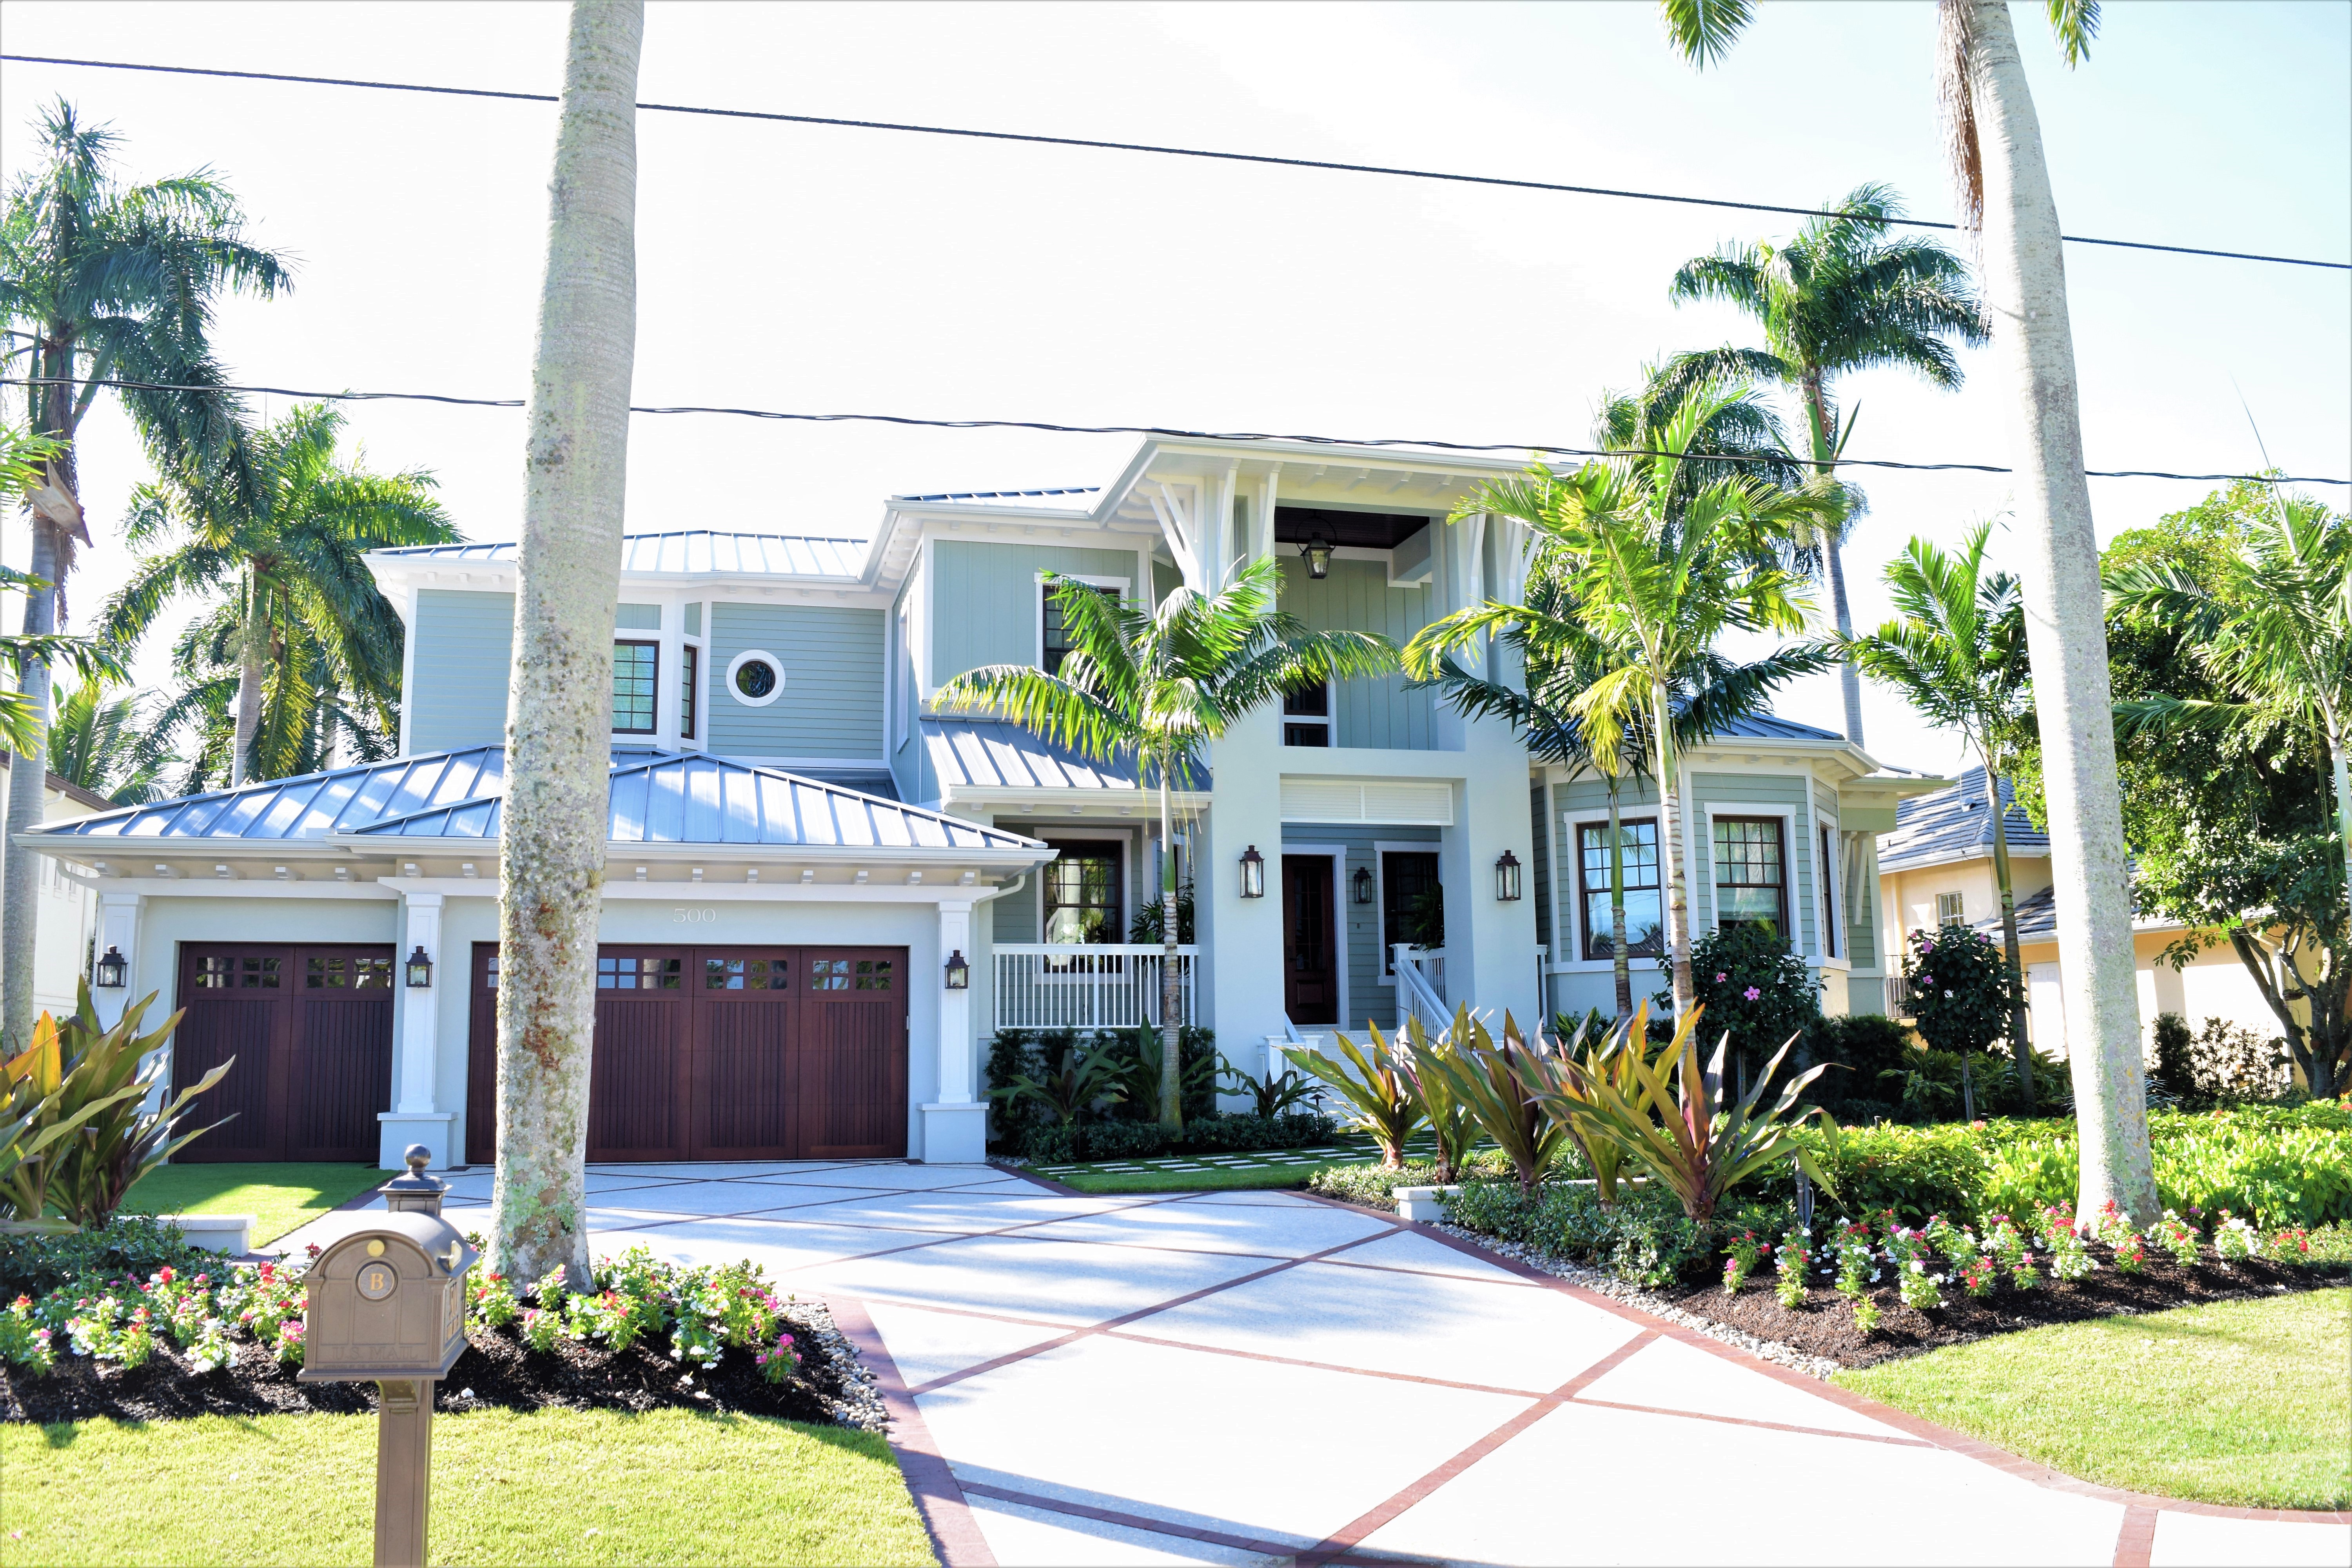 Residential Property Management in and near Golden Gate Florida